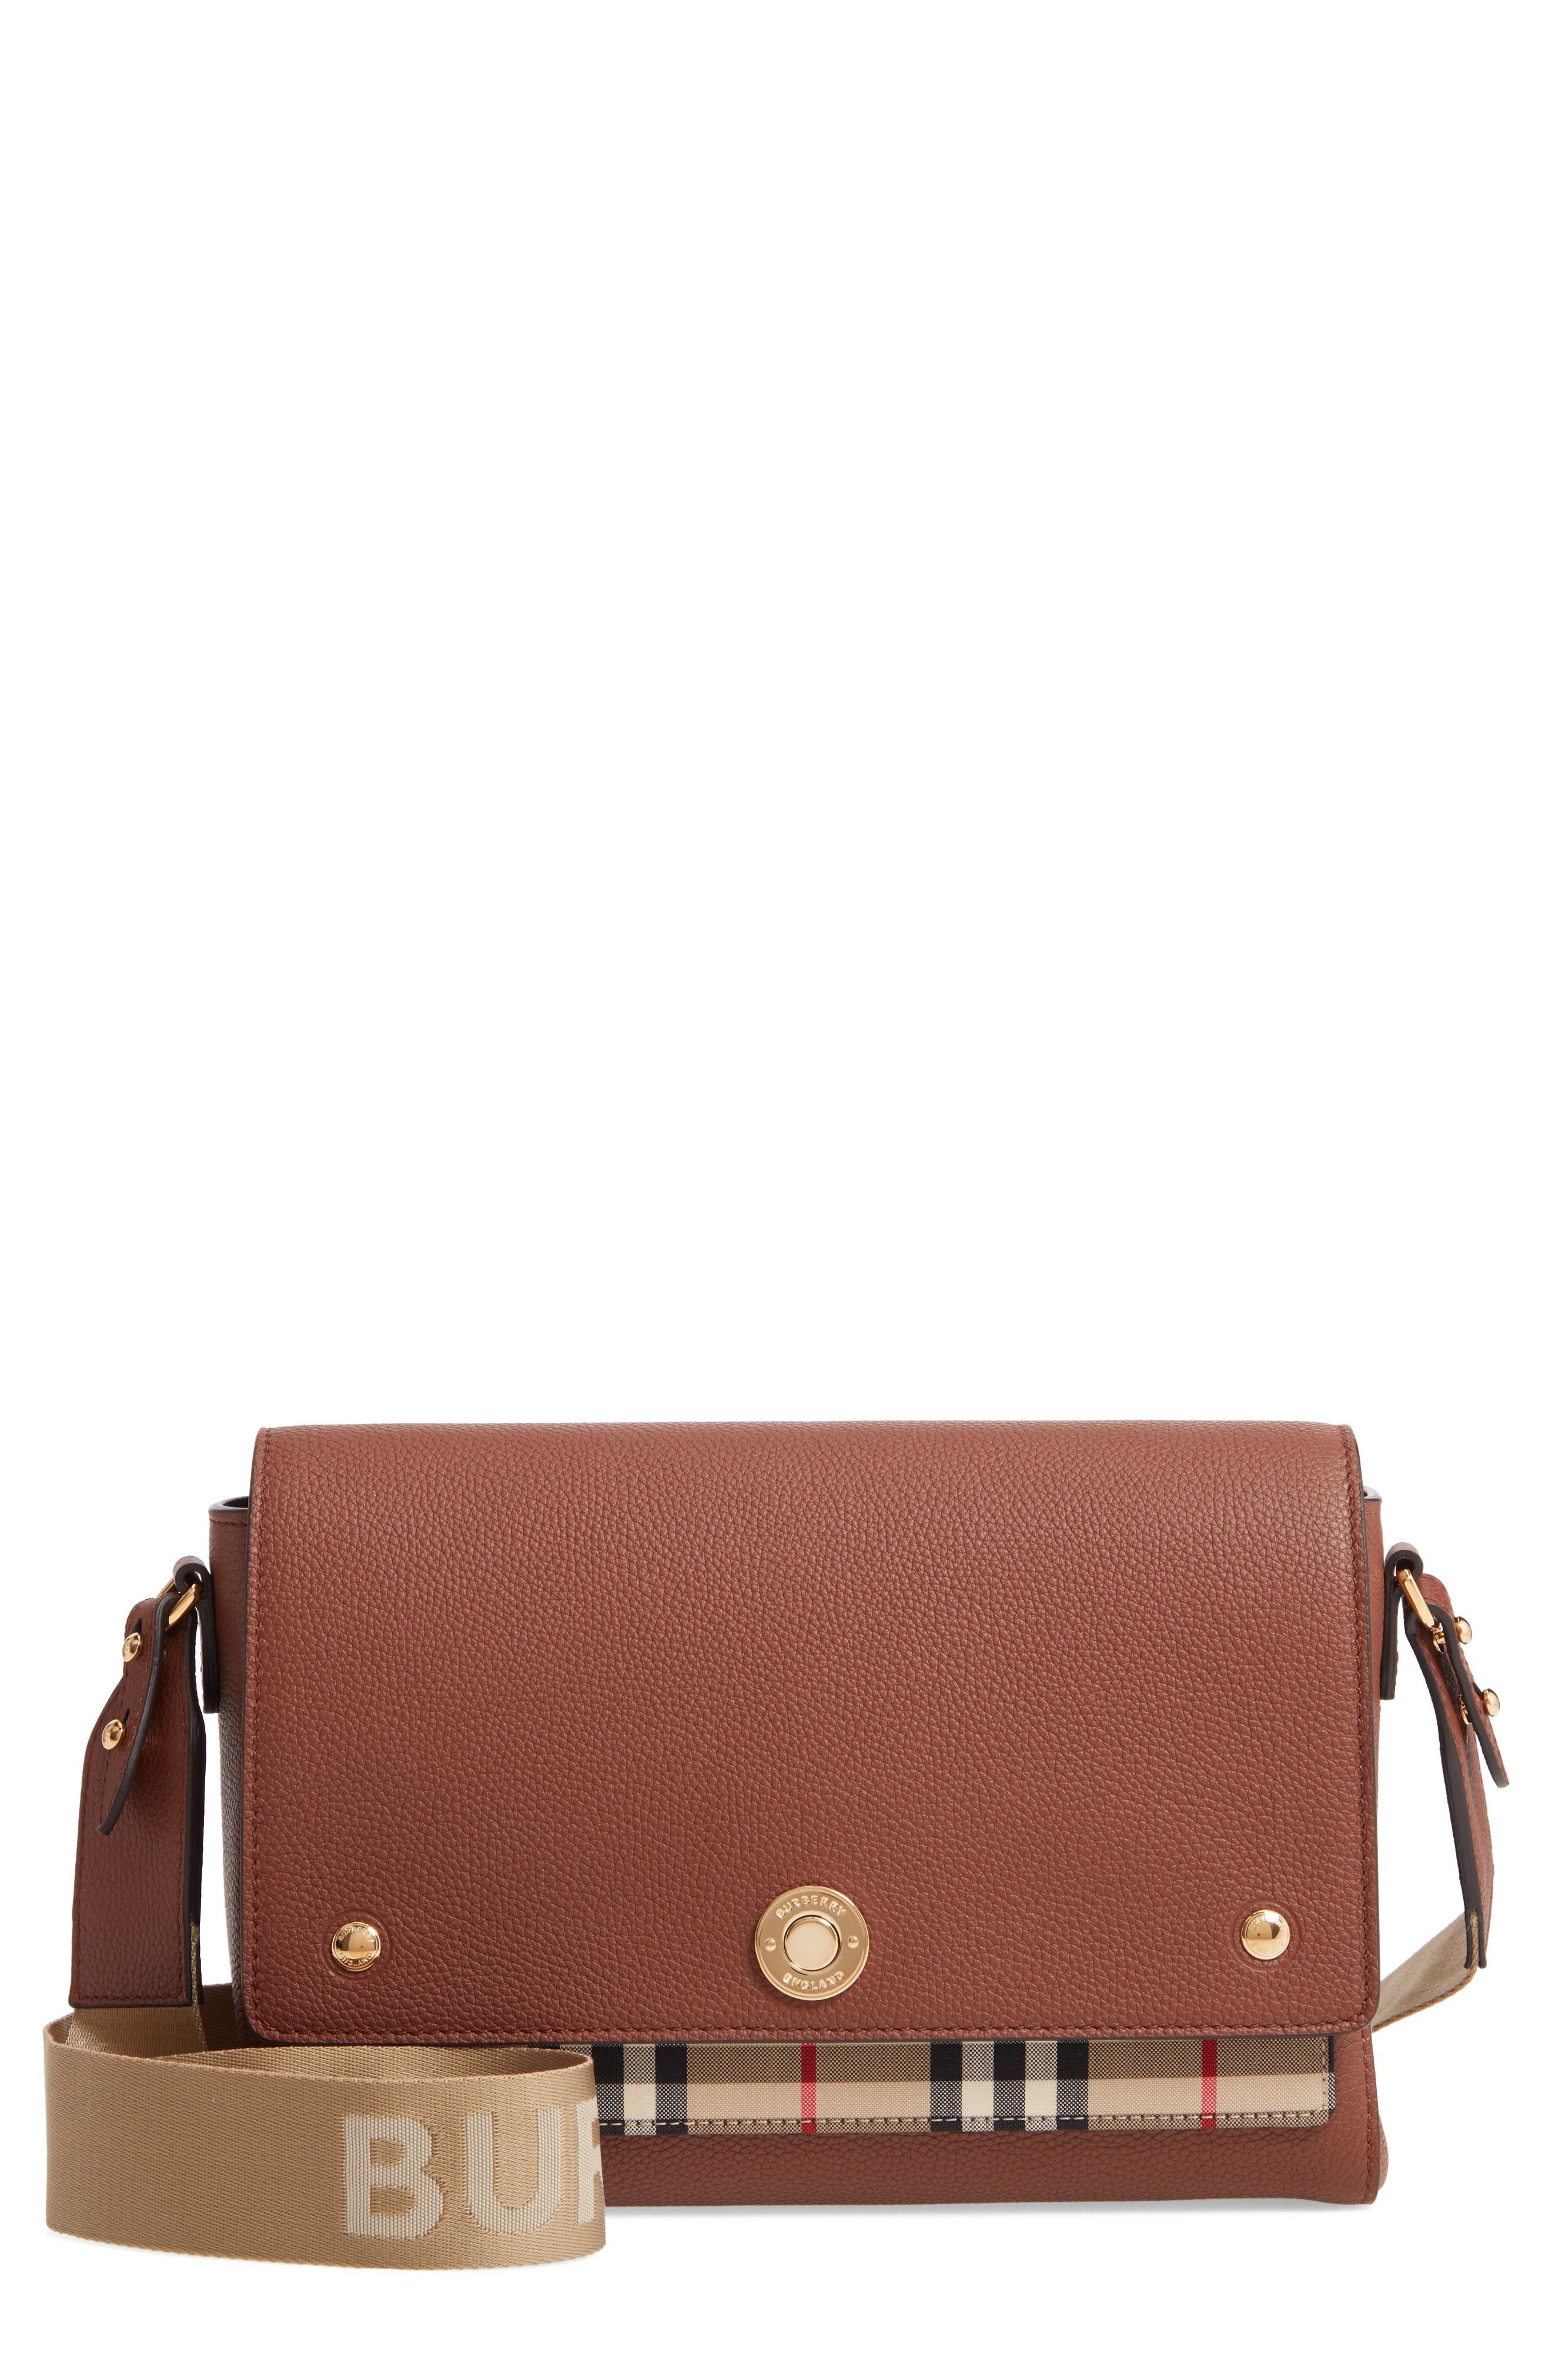 Burberry Note Leather & Vintage Check Crossbody Bag in Tan